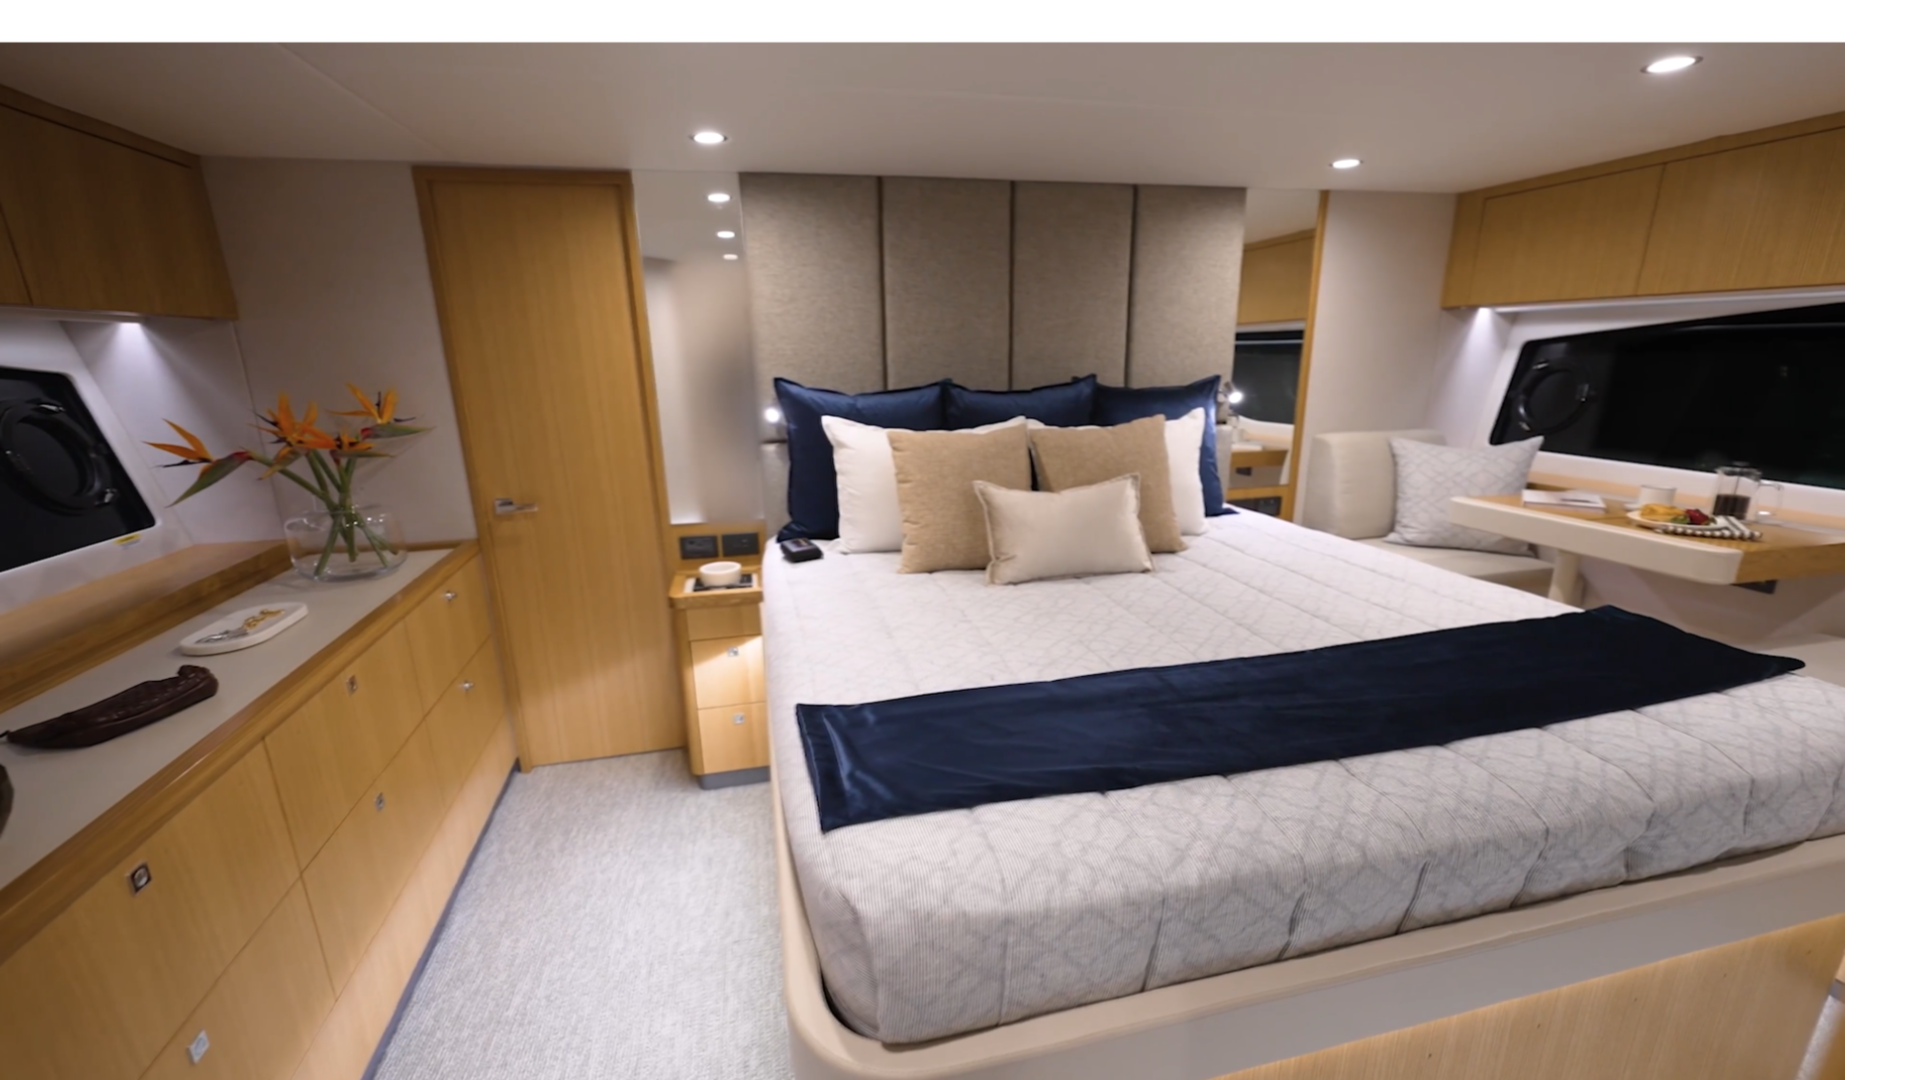 Riviera 58 SMY Riviera picture of the master in a yacht with the lighter wood option